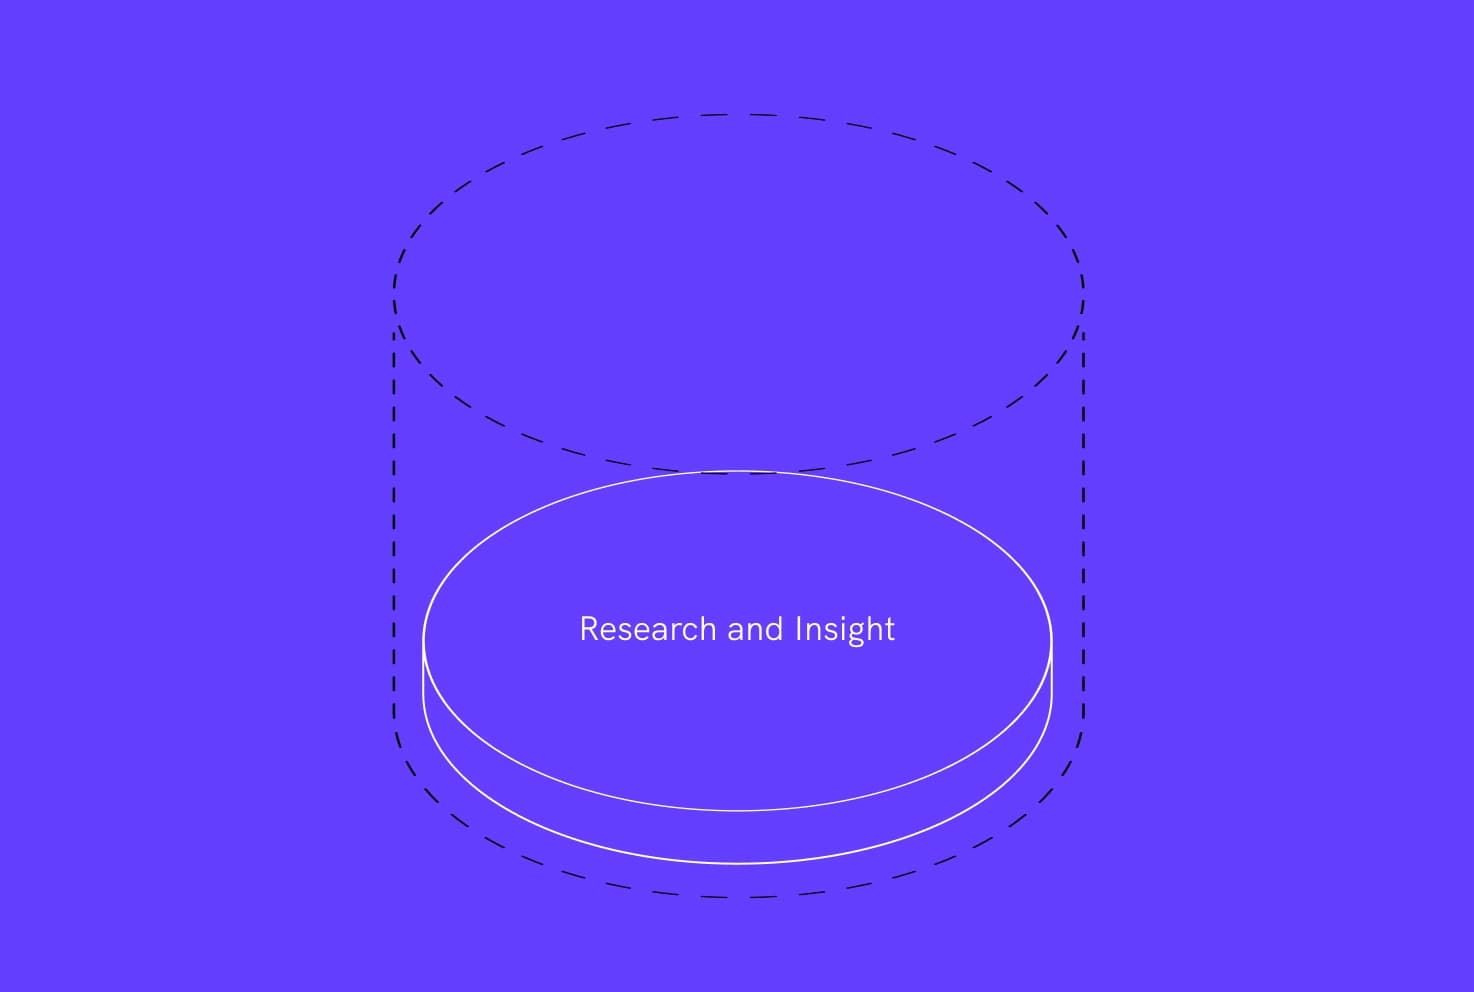 Research & Insight at webdna